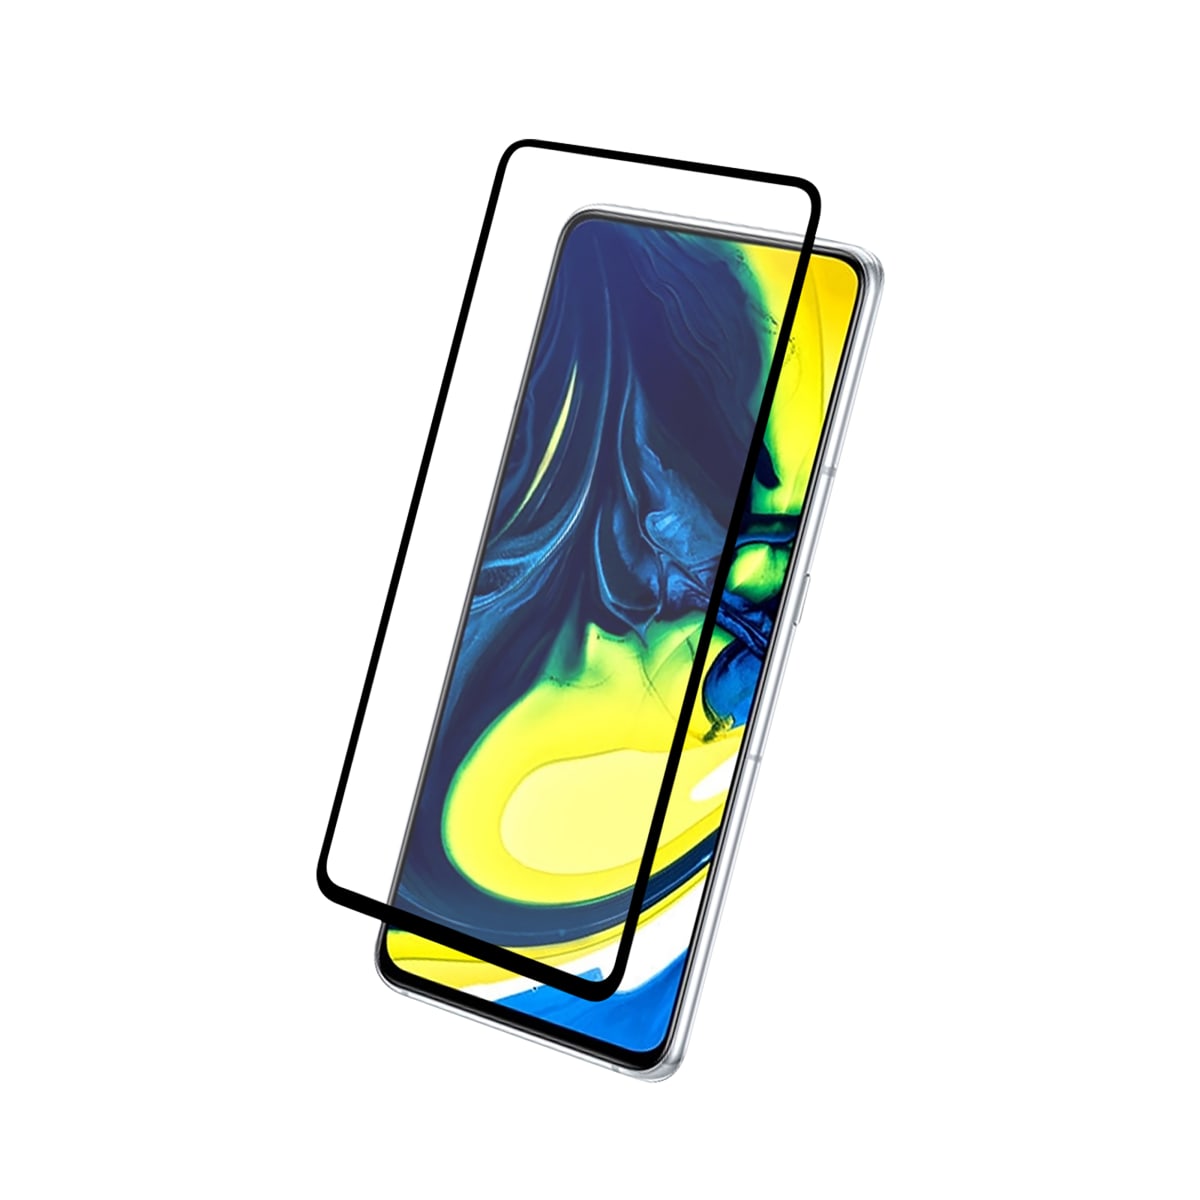 Tempered glass protection for Samsung Galaxy A90 and A80